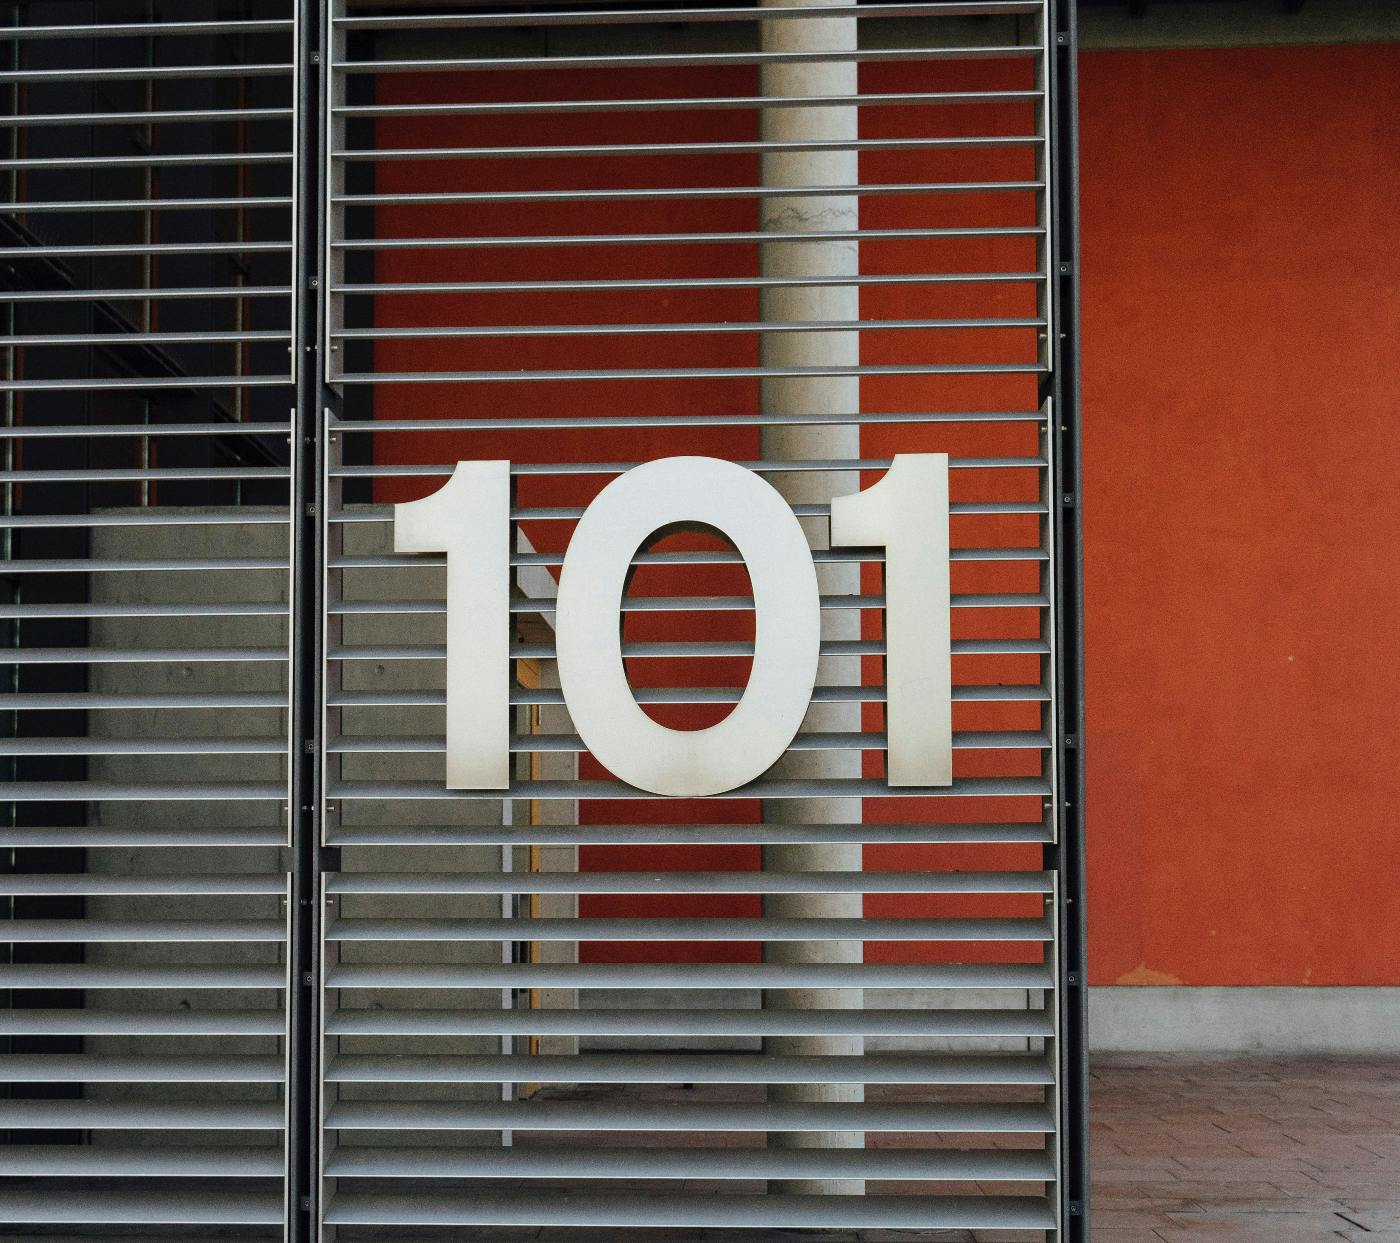 A slat window with the number 101 on it